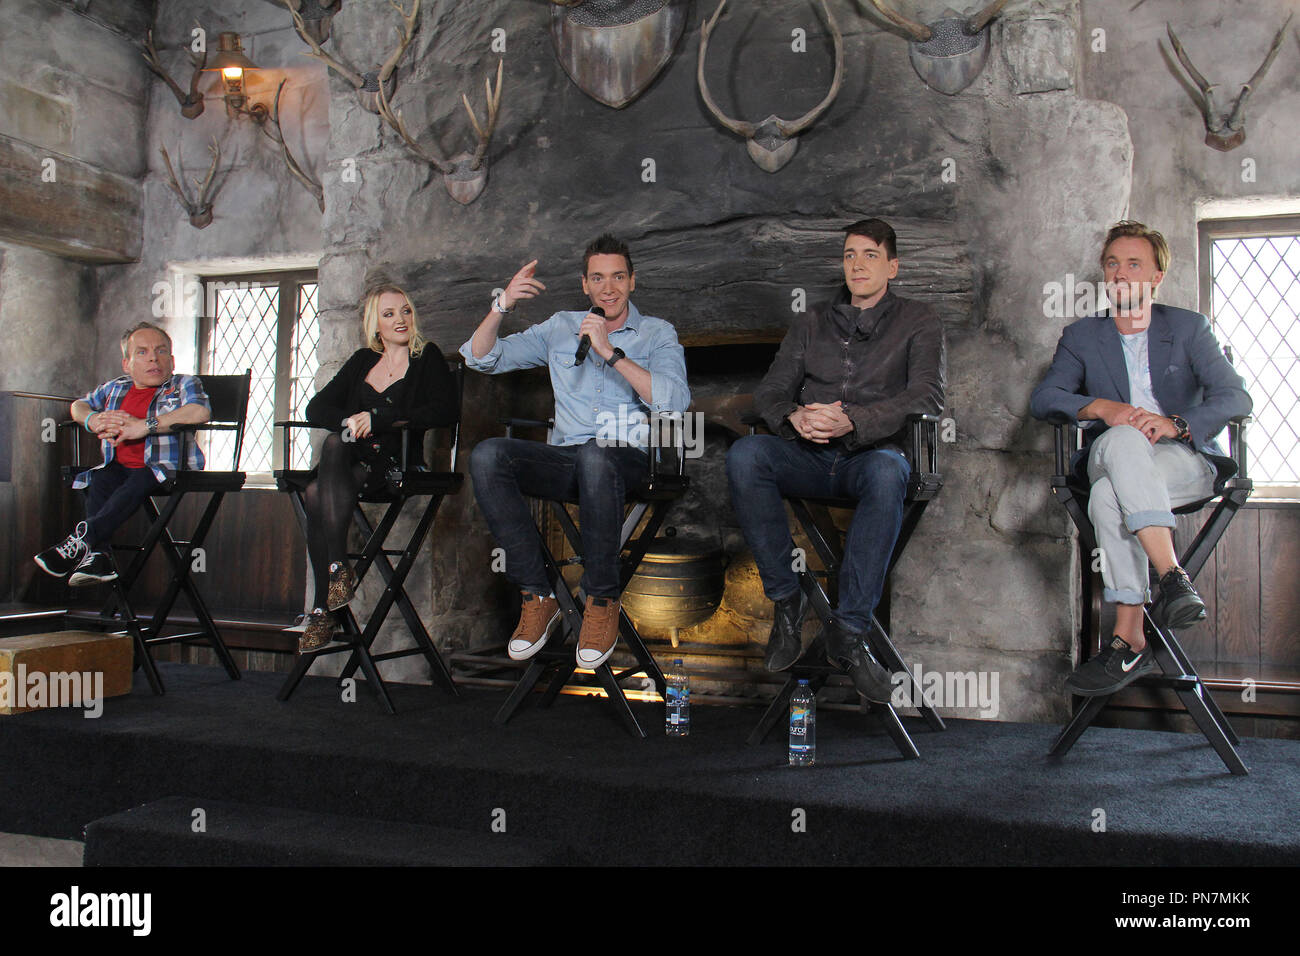 Warwick Davis, Evanna Lynch, James Phelps, Oliver Phelps, Tom Felton     04/06/2016 The Wizarding World of Harry Potter Media Preview Day held at the Universal Studios Hollywood in Hollywood, CA Photo by Kazuki Hirata / HNW / PictureLux Stock Photo